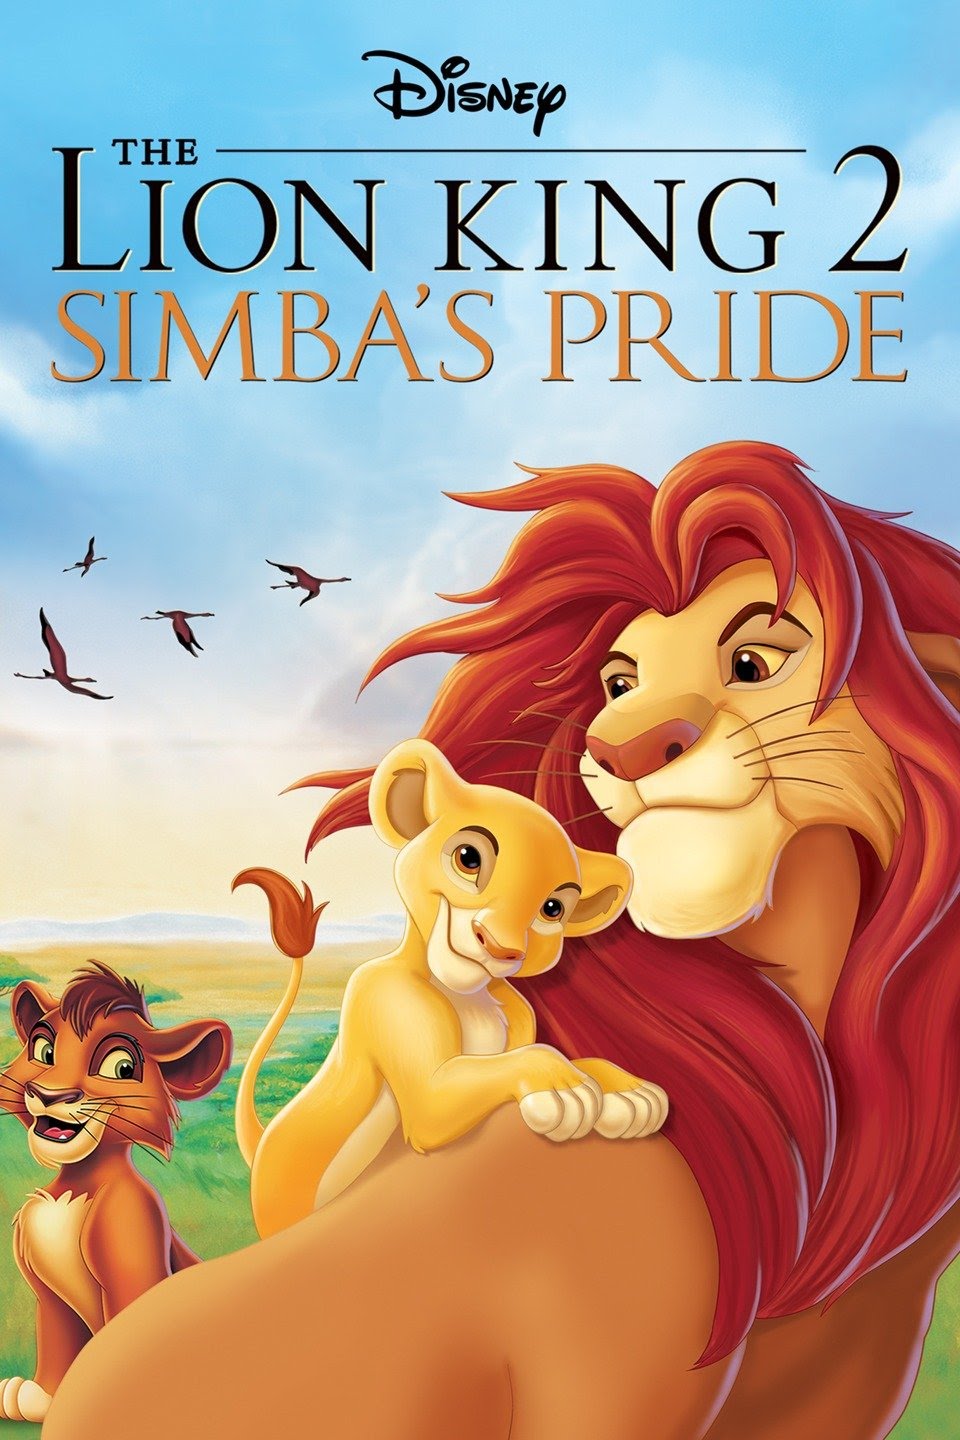 The Lion King 2: Simba's Pride (1998) Vudu or Movies Anywhere HD redemption only